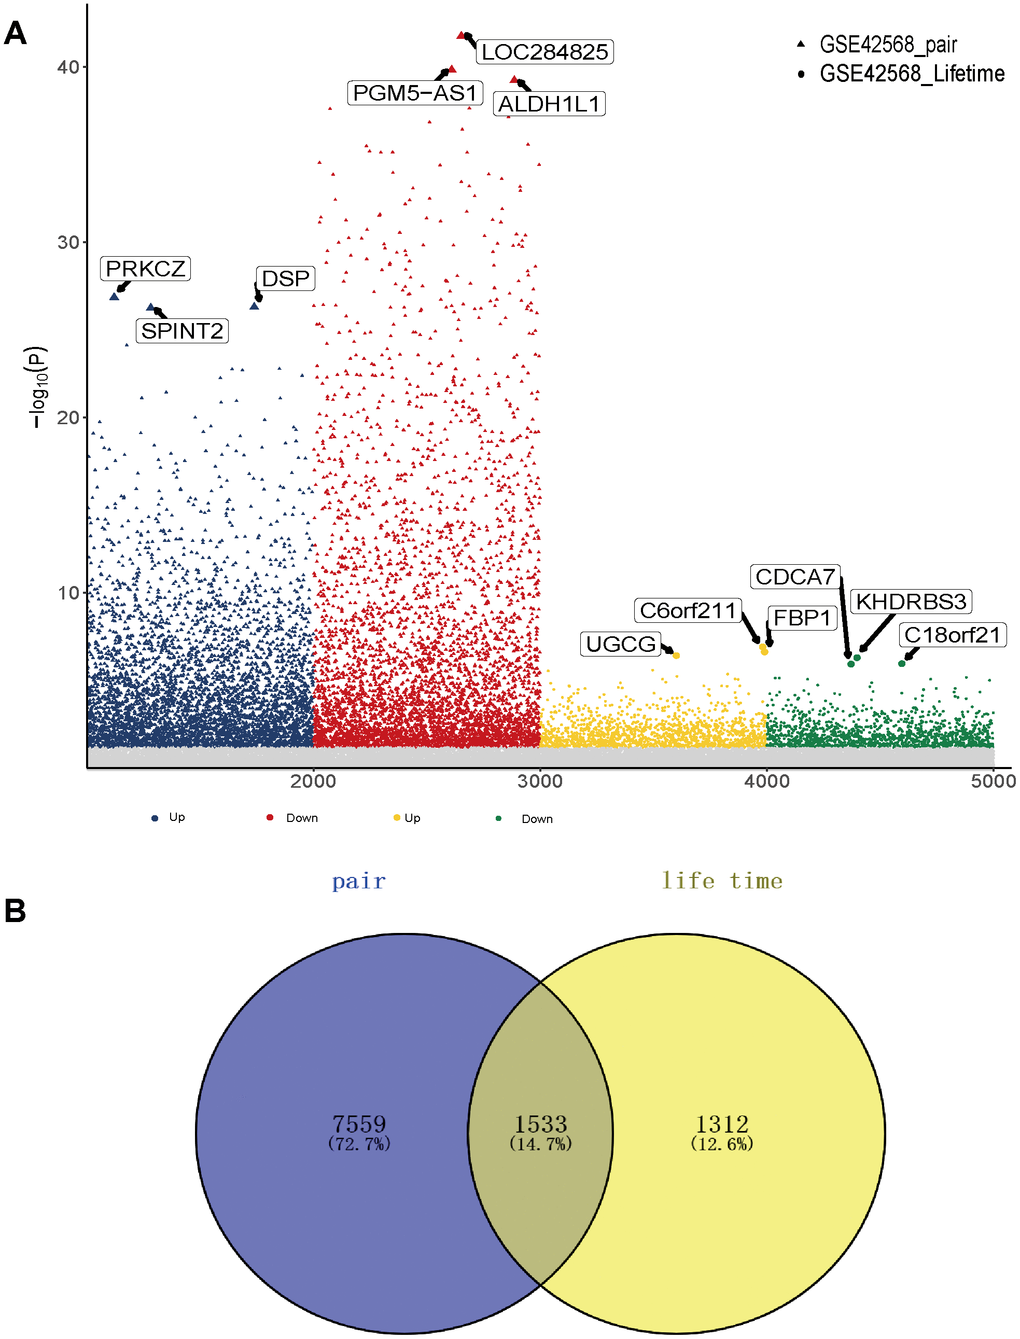 Gene expression in breast cancer patients. (A) Differentially expressed genes between breast cancer patients and the control group as well as breast cancer patients with high and low survival times. (B) The common differentially expressed genes in the two groups.